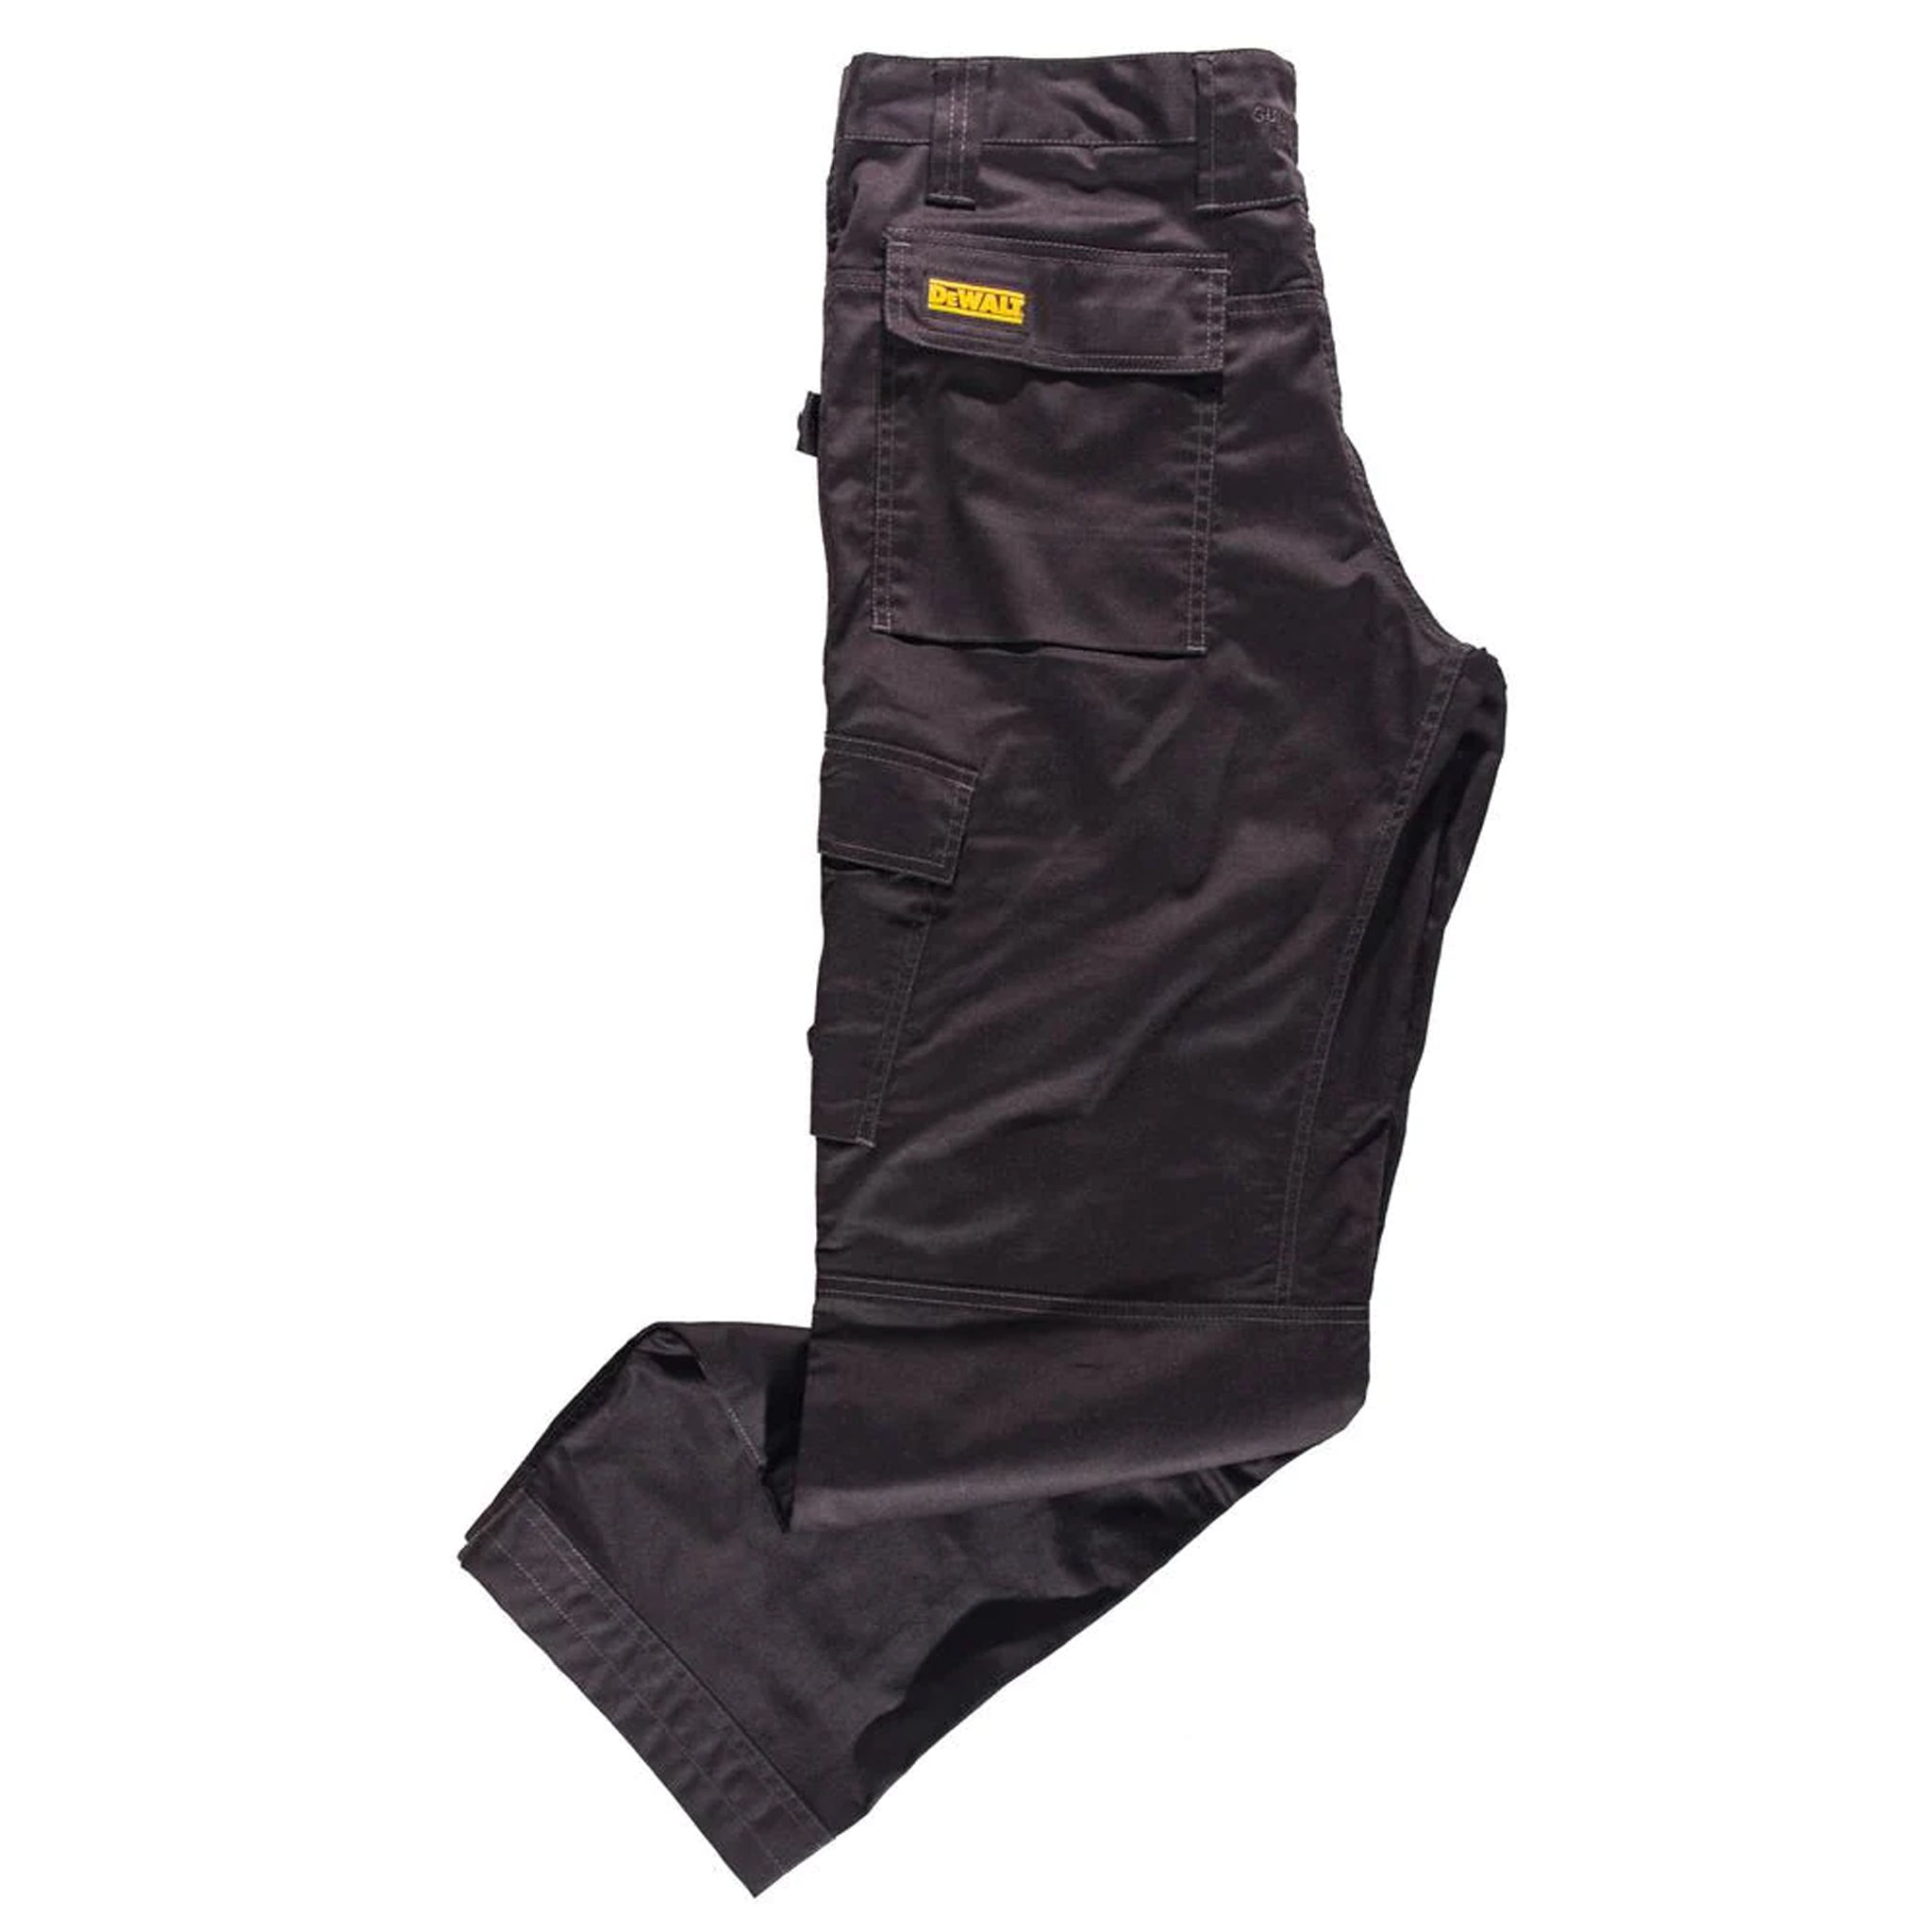 DEWALT Men's DXWW50022 Stretch Work Pants – That Shoe Store and More